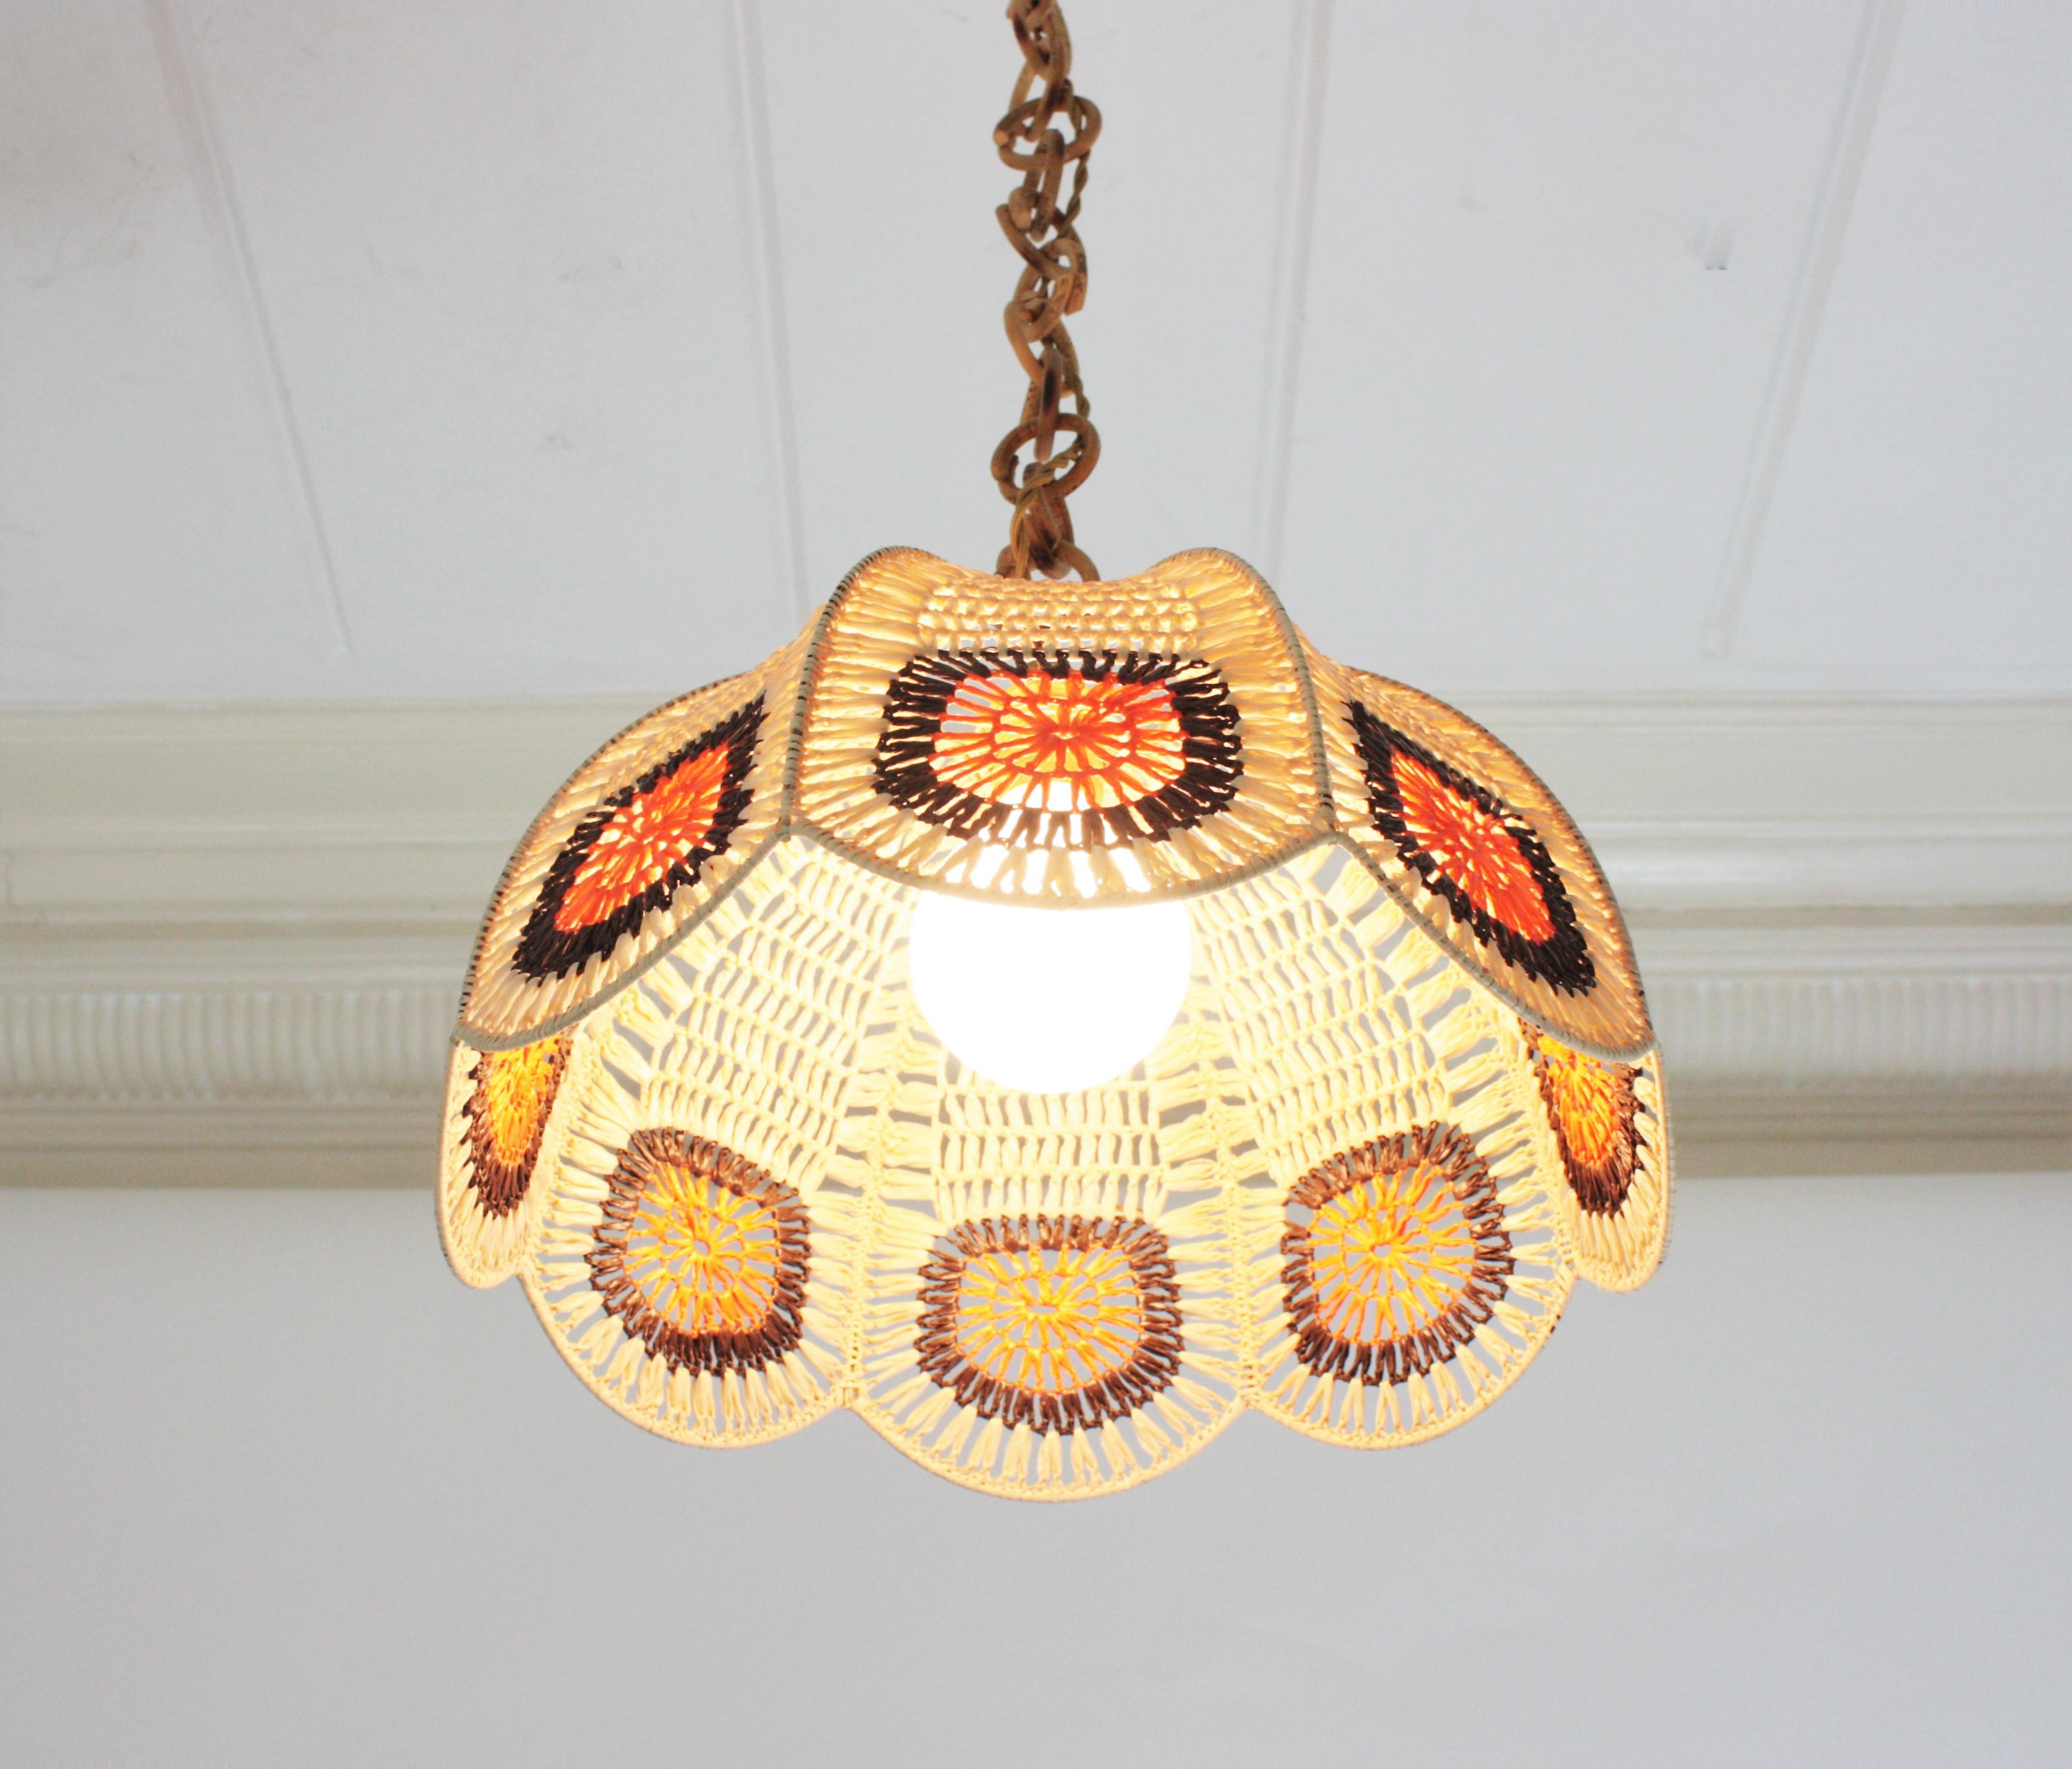 Spanish Modernist Pendant Lamp in Beige, Orange and Brown Macrame For Sale 1